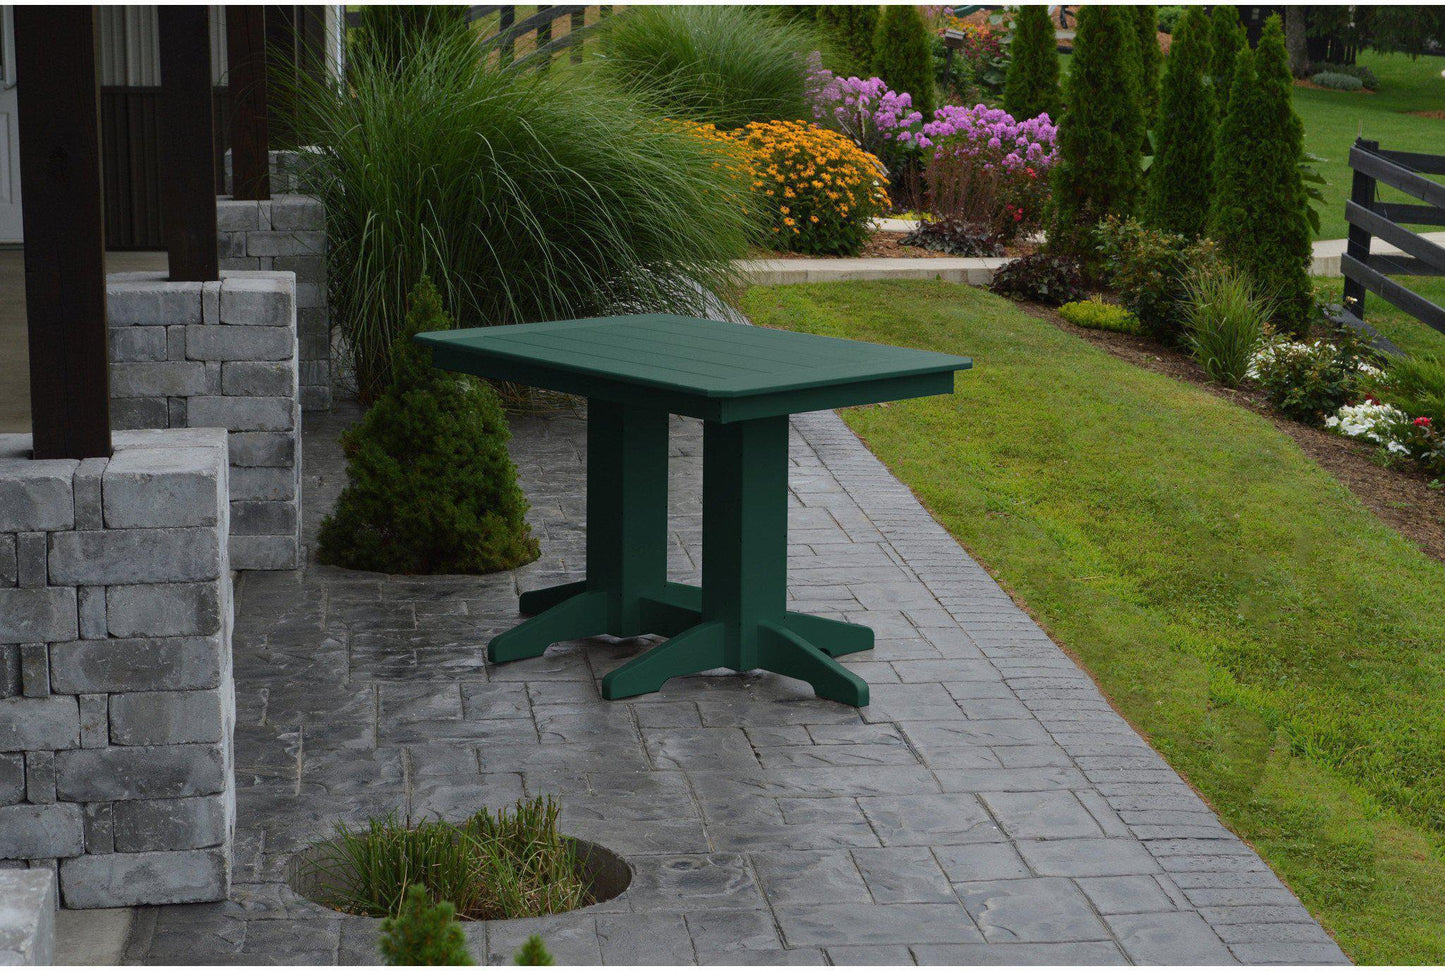 A&L Furniture Company Recycled Plastic 4' Dining Table - Turf Green